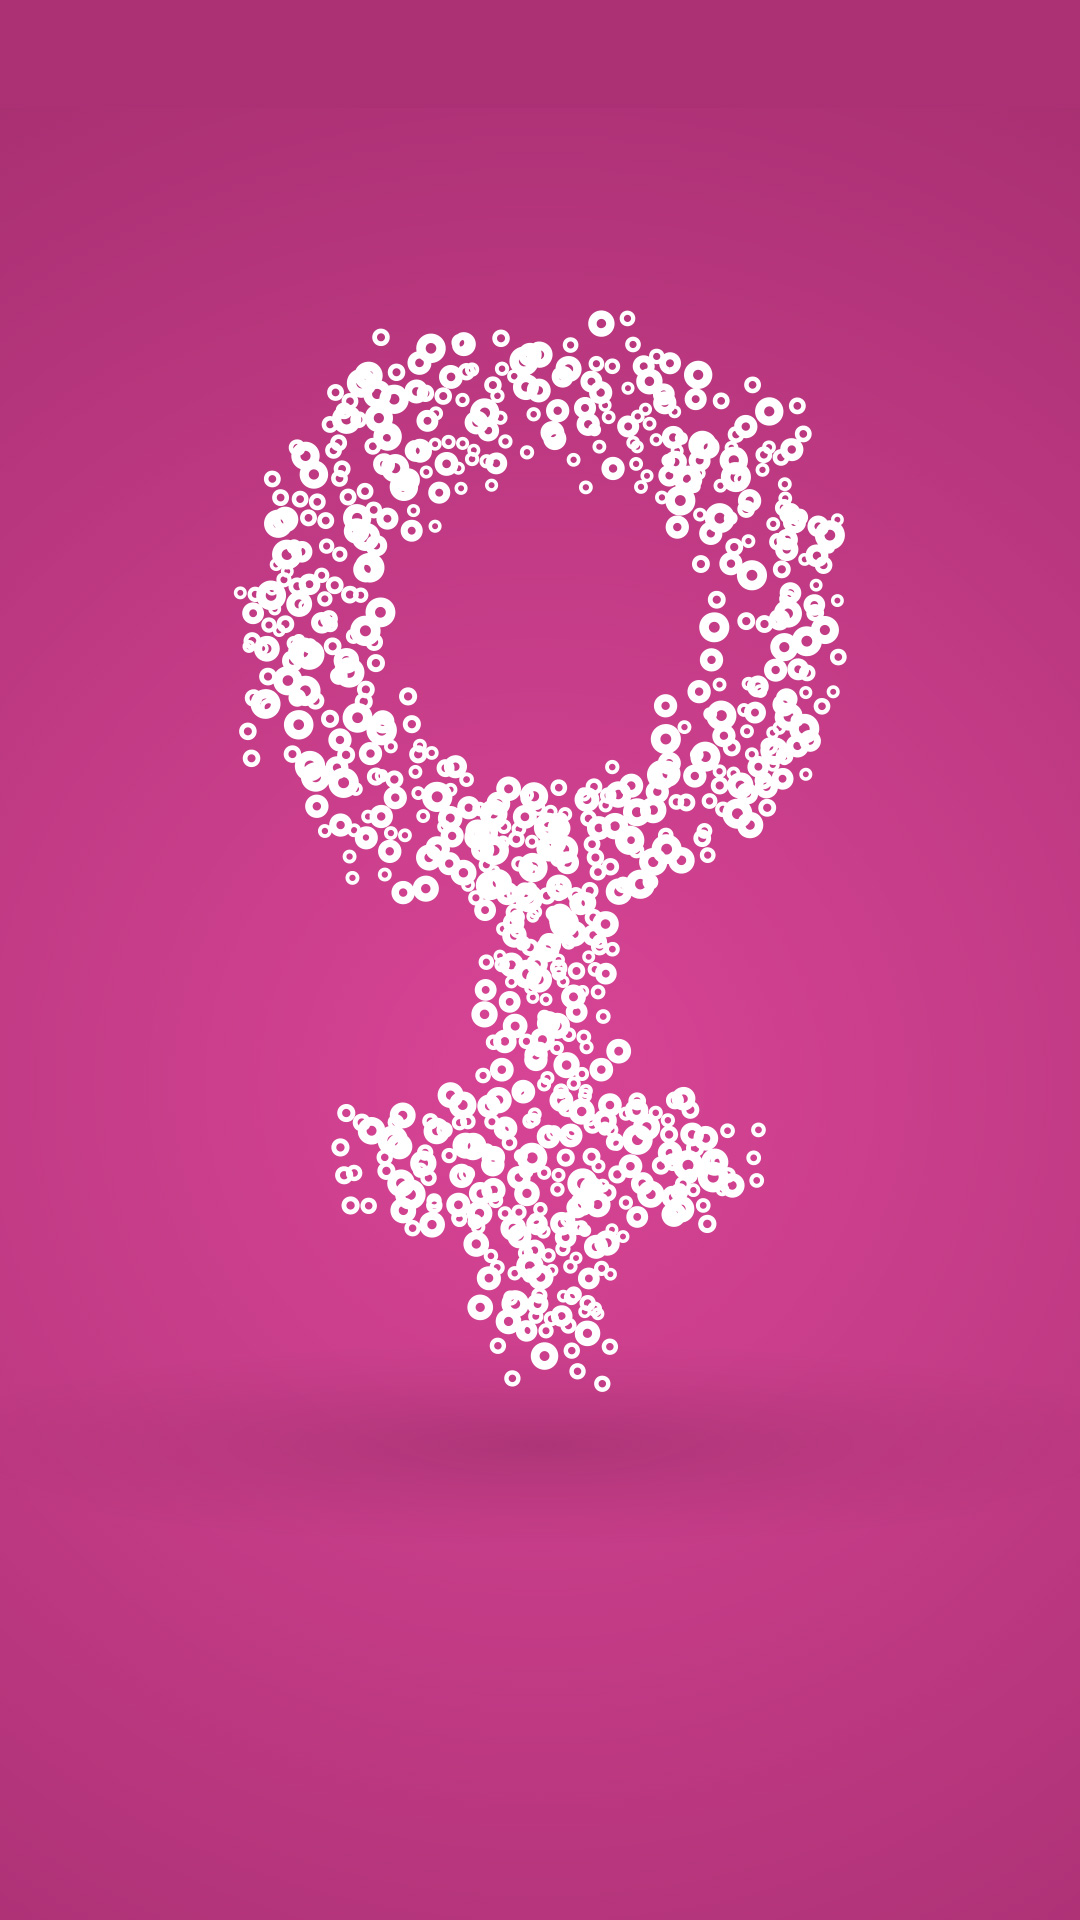 Womens Rights Wallpaper Images  Free Download on Freepik